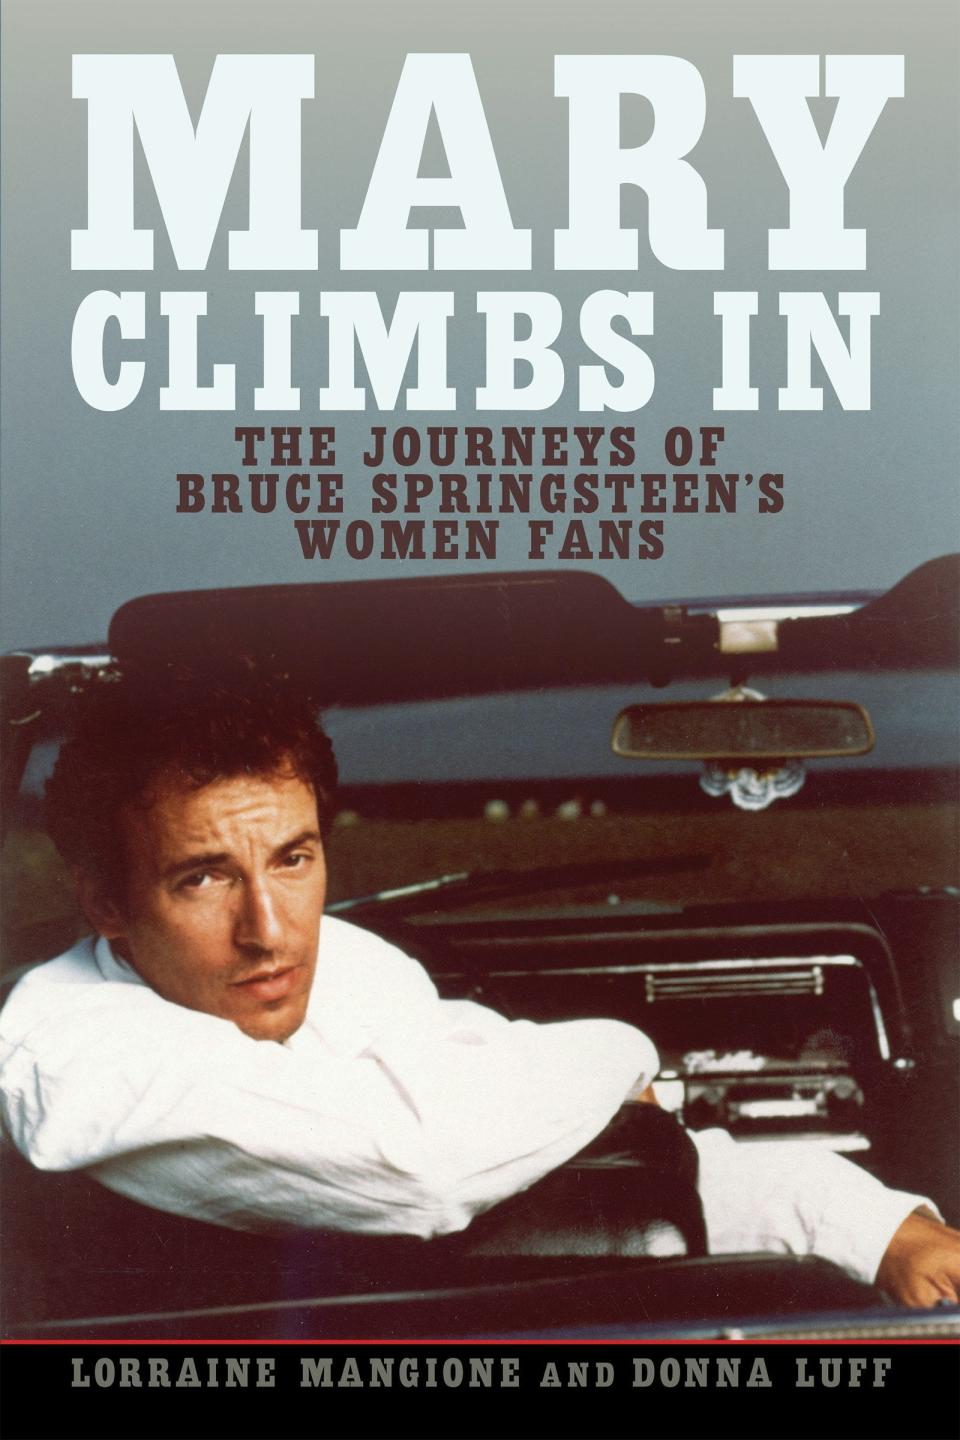 The cover for "Mary Climbs In: The Journeys of Bruce Springsteen's Women Fans" by Lorraine Mangione and Donna Luff from 
Rutgers University Press.